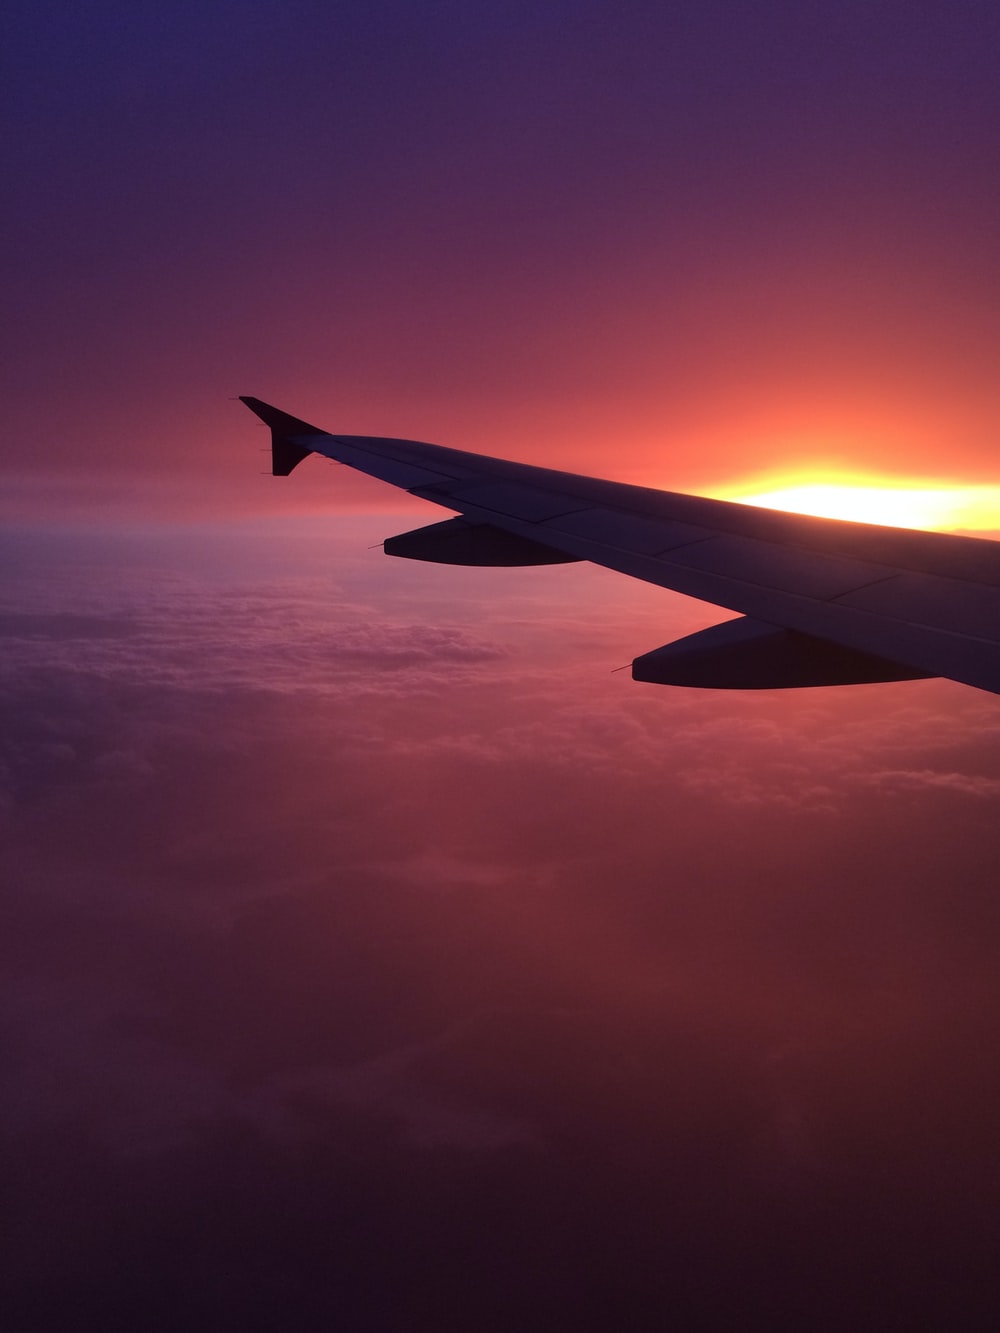 Airplane Sunset Picture. Download Free Image